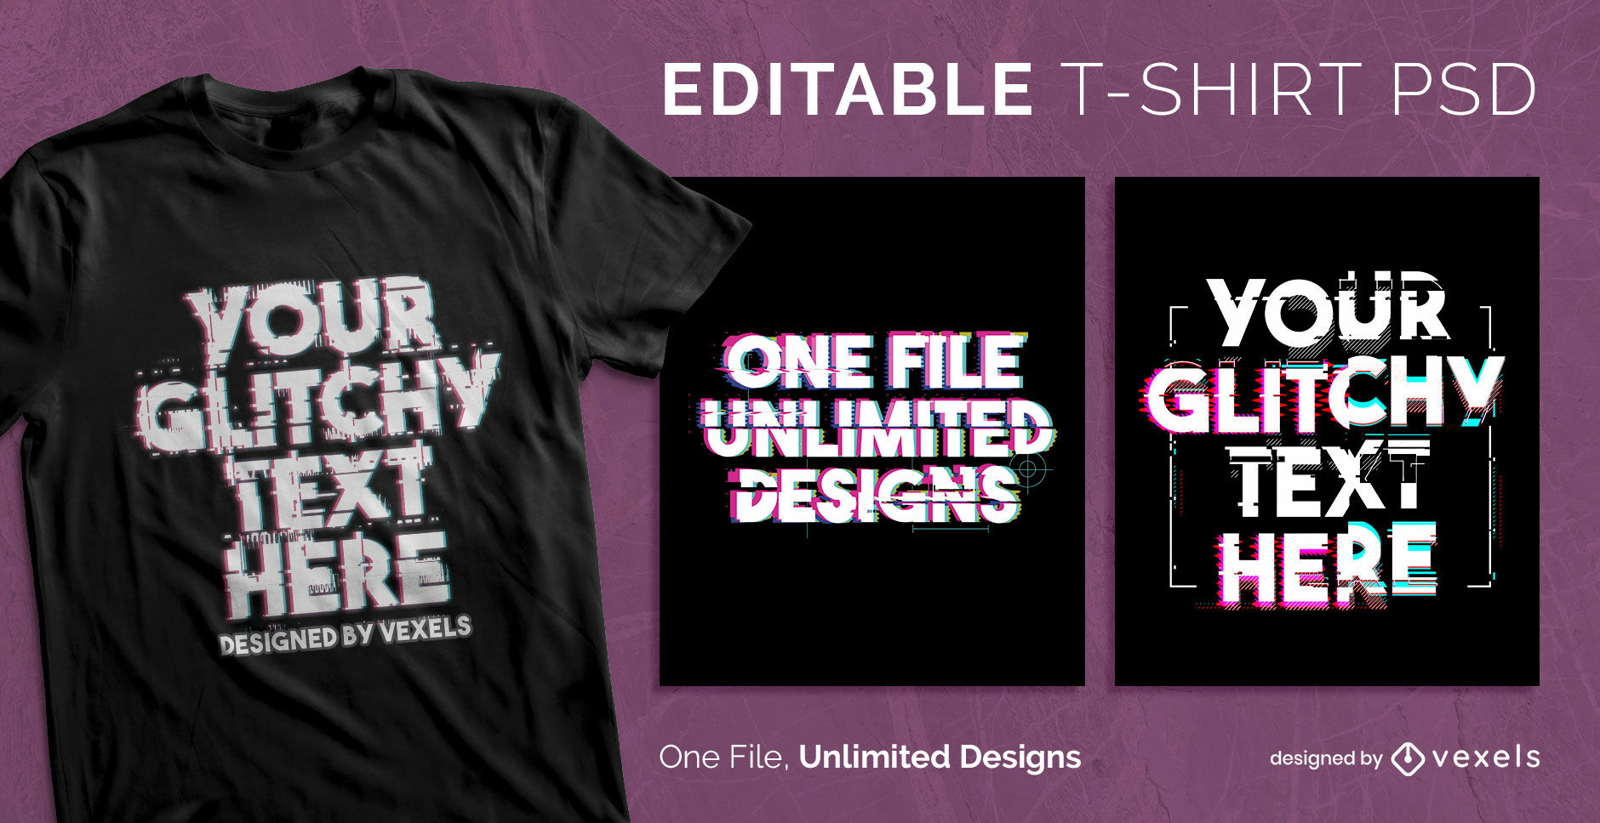 Glitchy text scalable t-shirt PSD